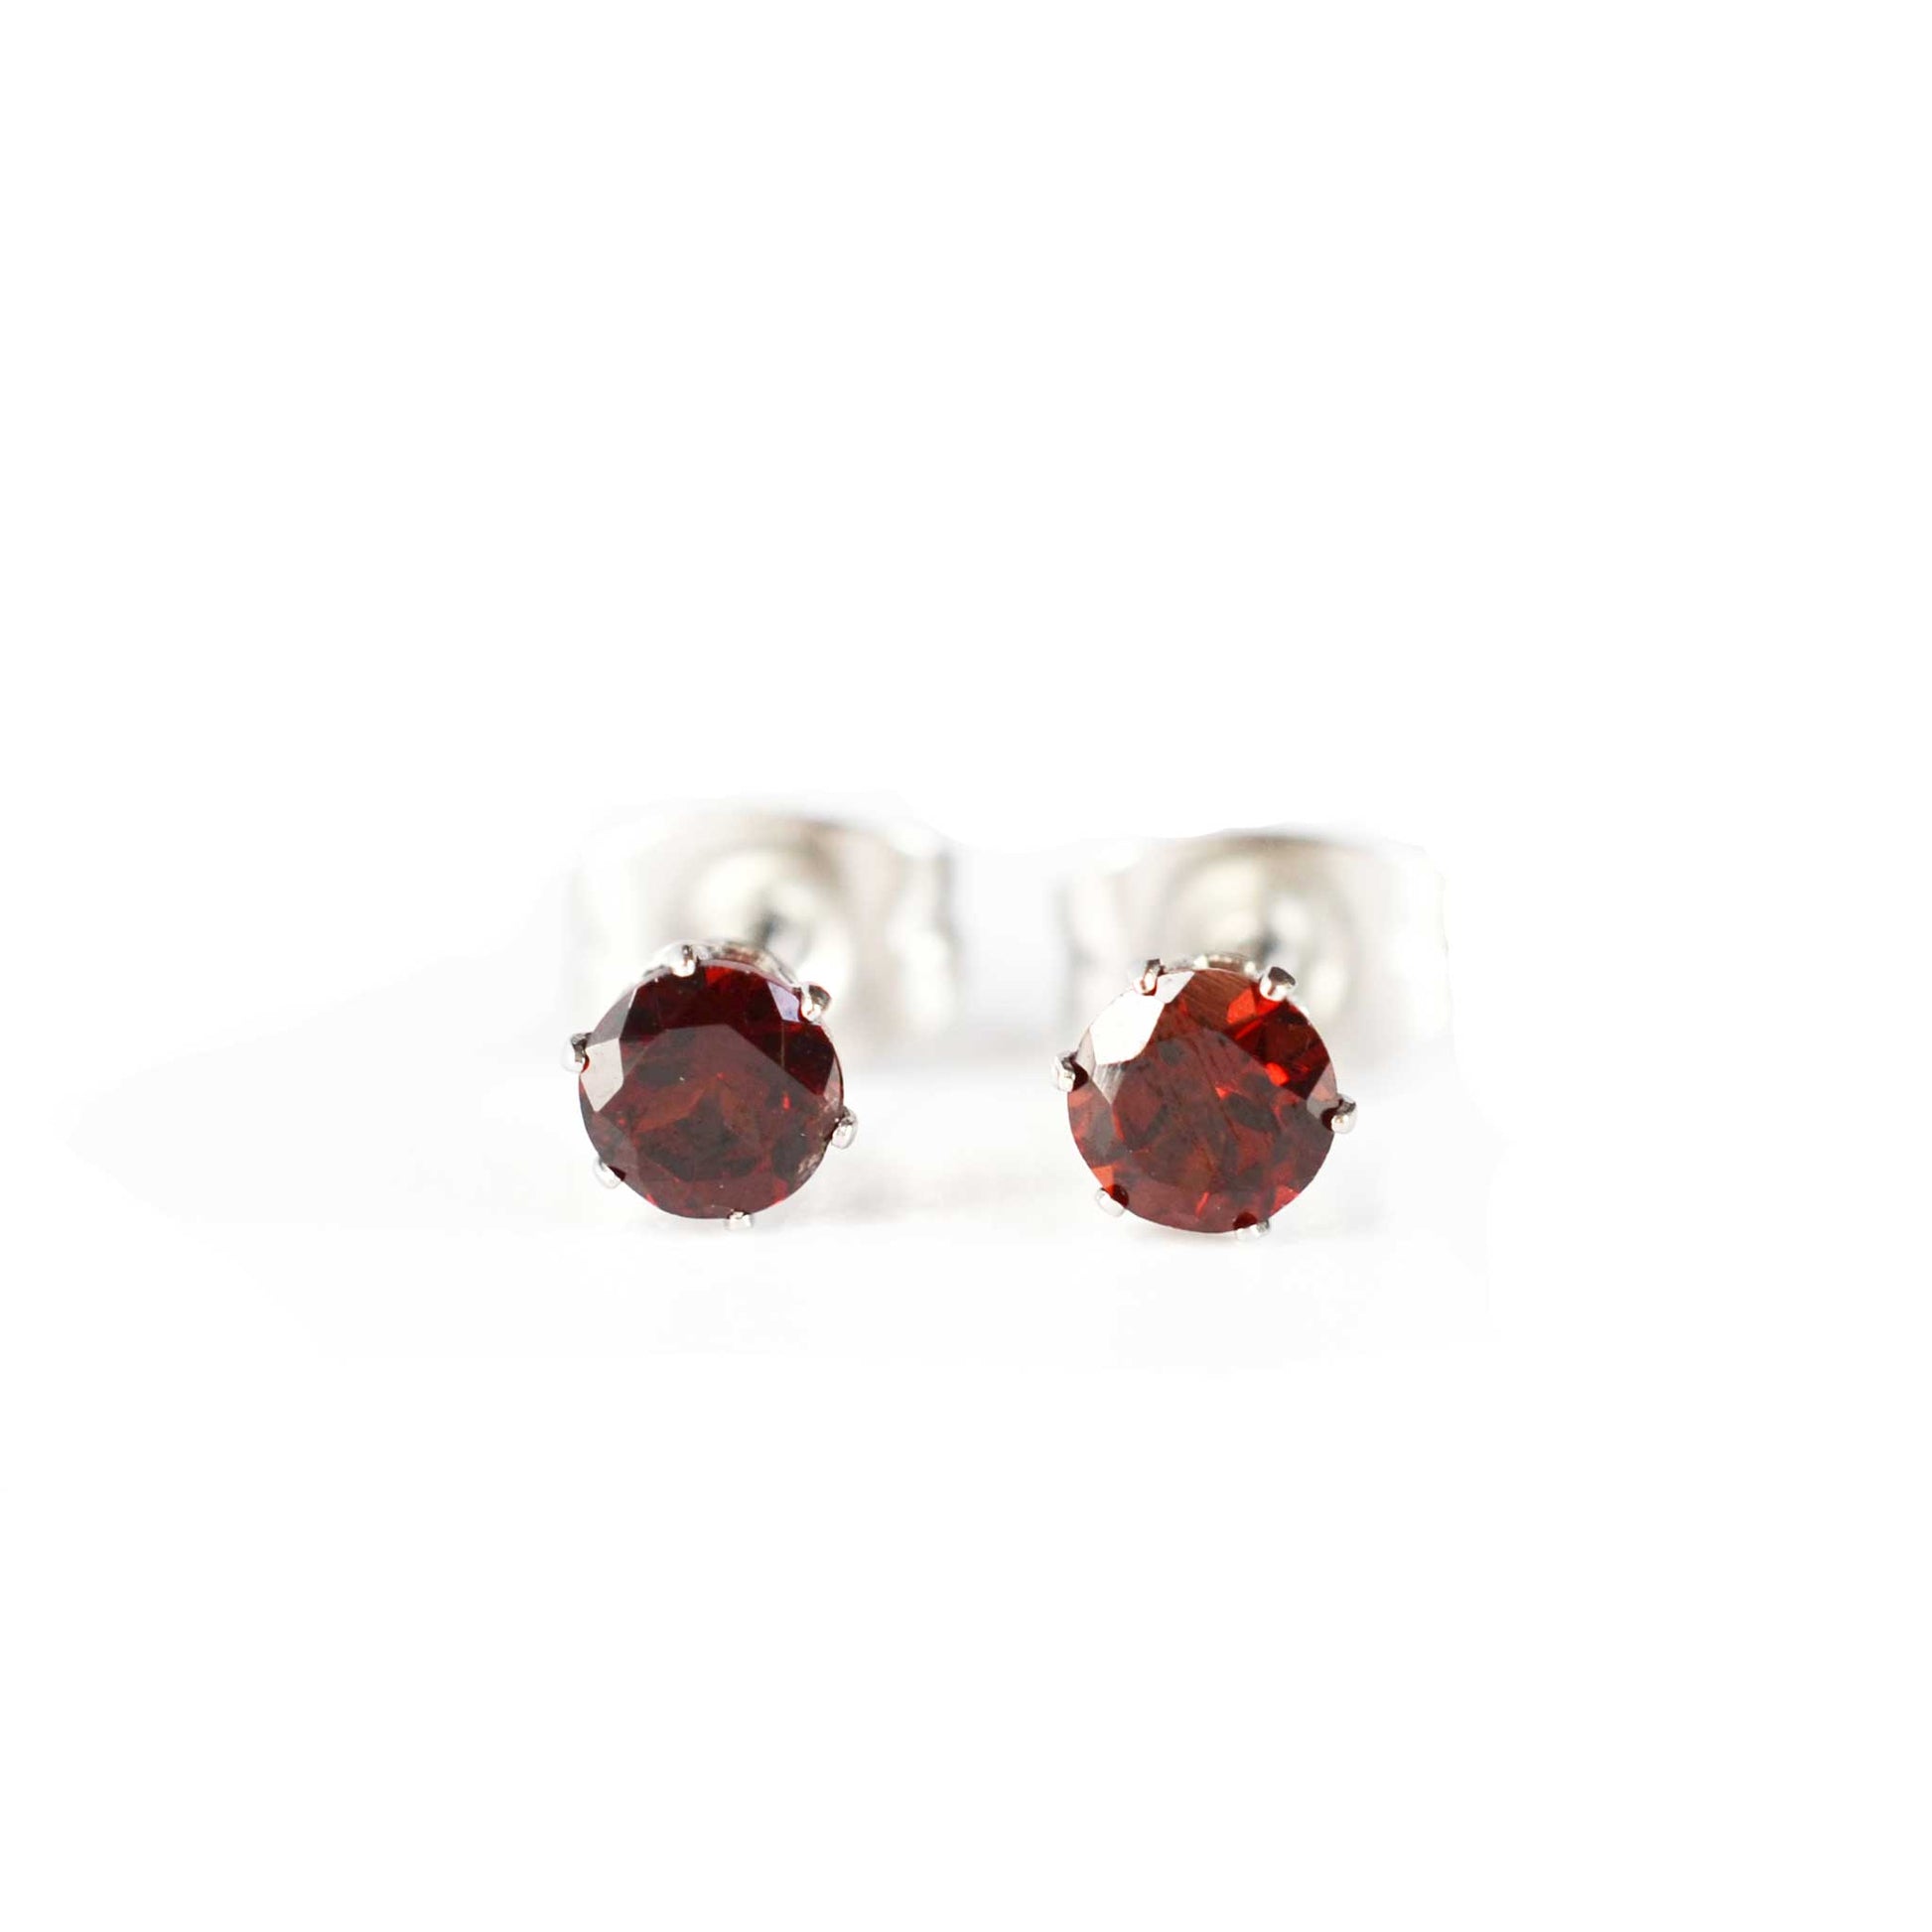 Front view of tiny faceted Garnet gemstone stud earrings on white background